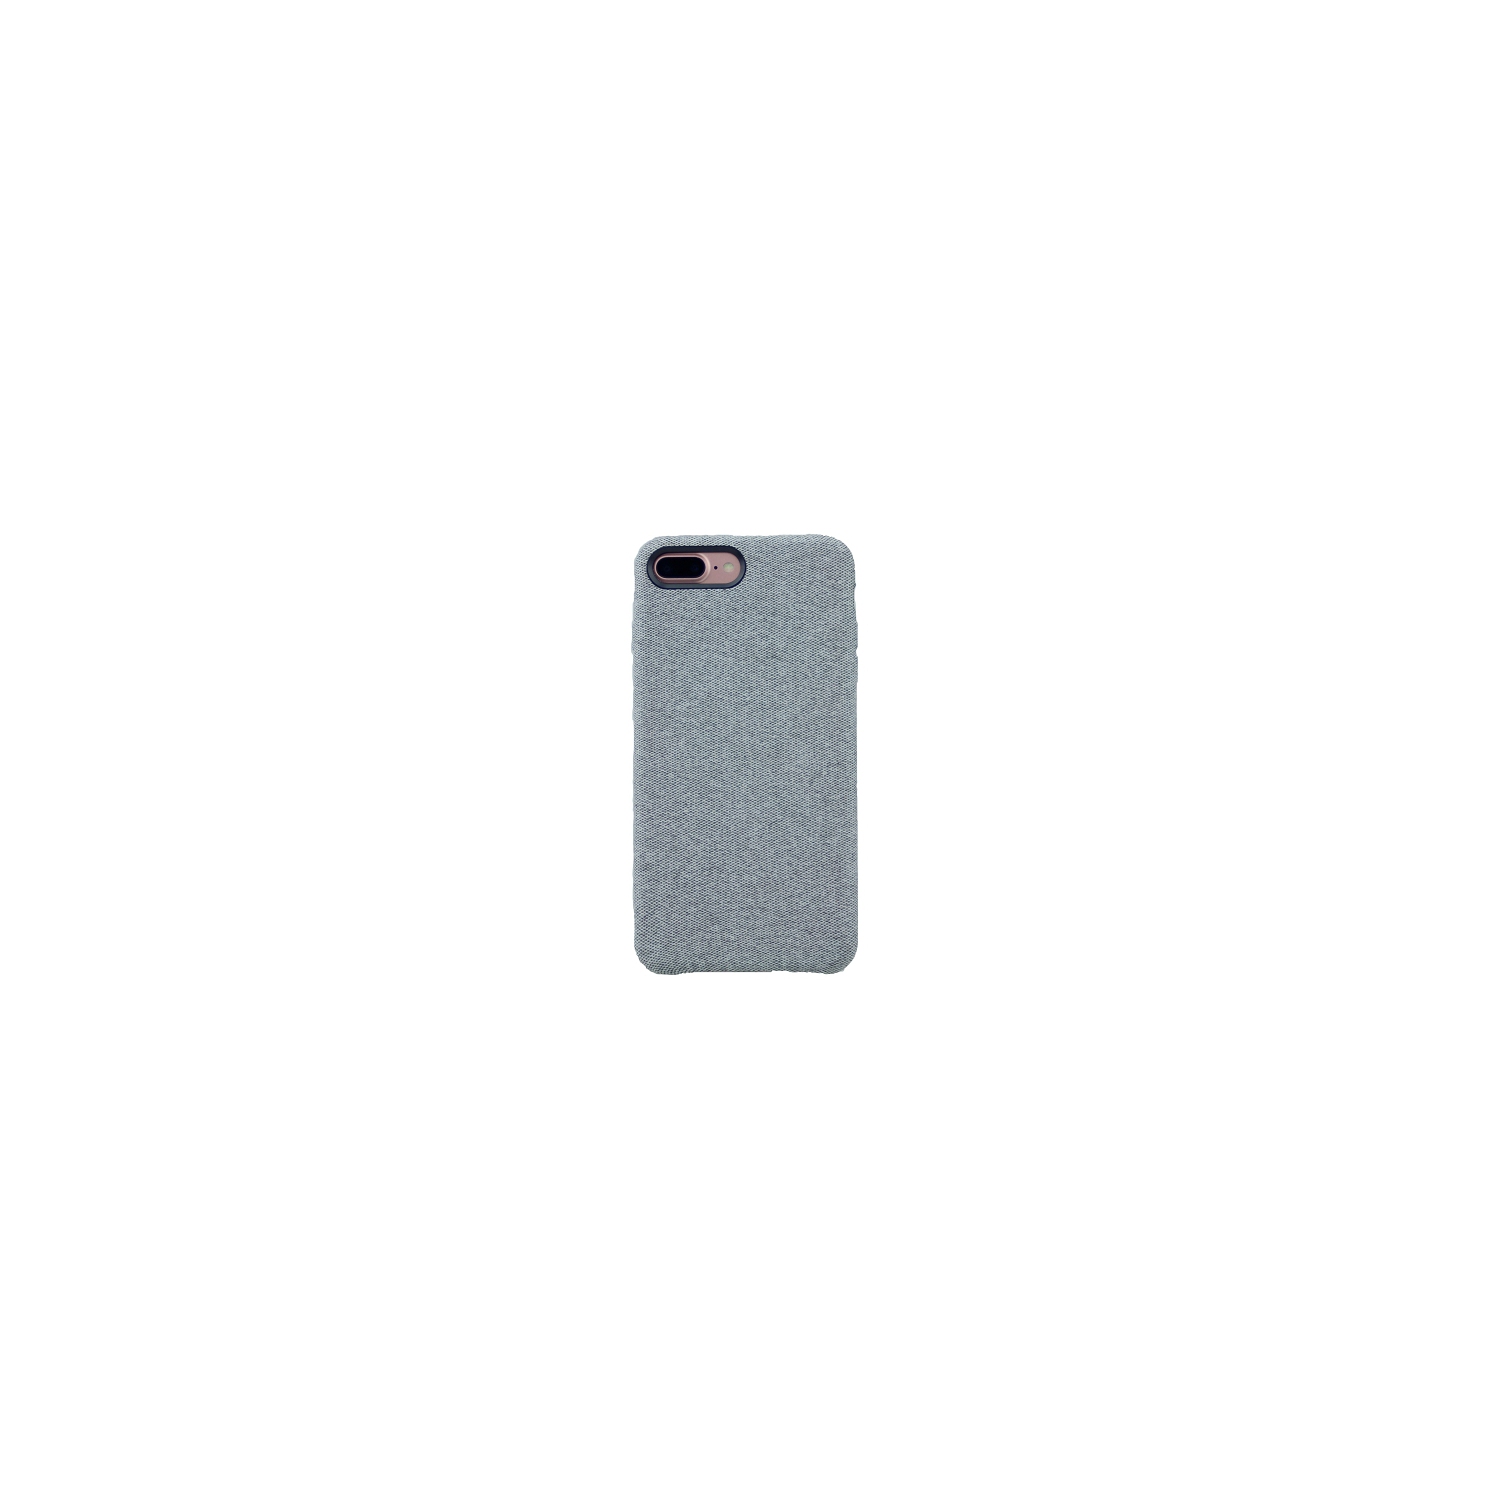 Fabric Protective Case For Iphone 5/s/SE(2016), Gray